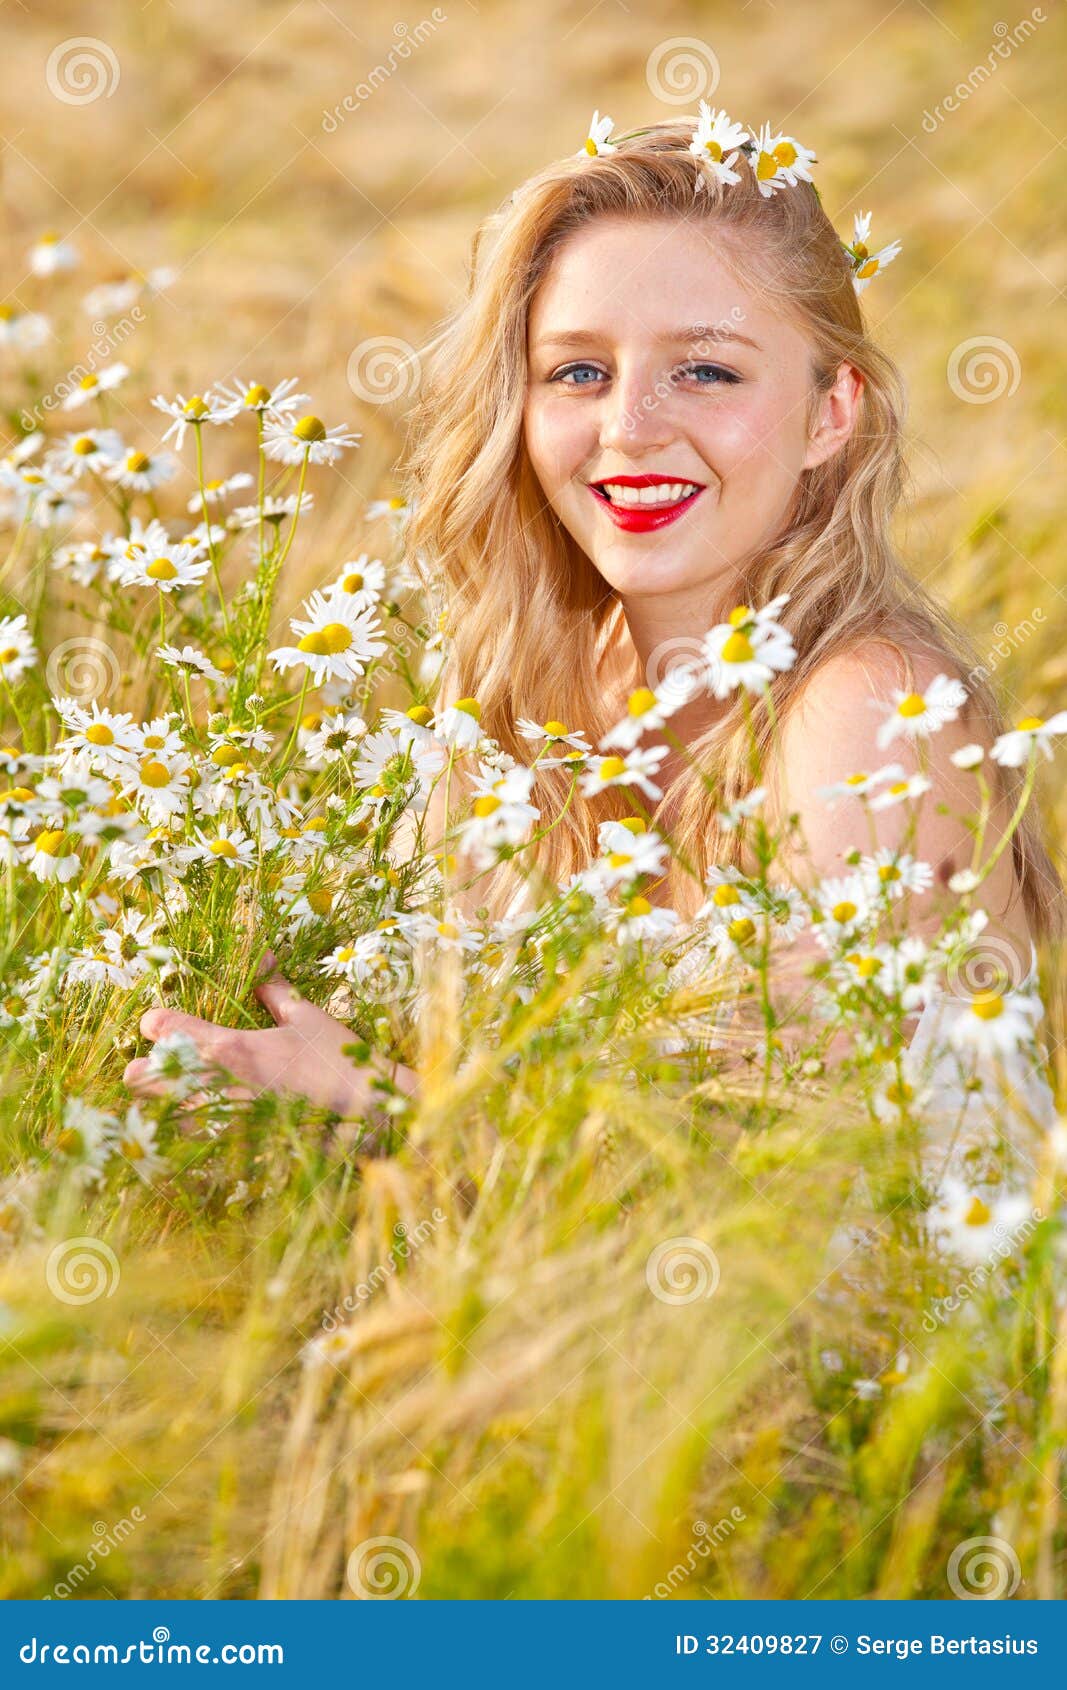 Blond Girl on the Camomile Field Stock Image - Image of bloom, cute ...